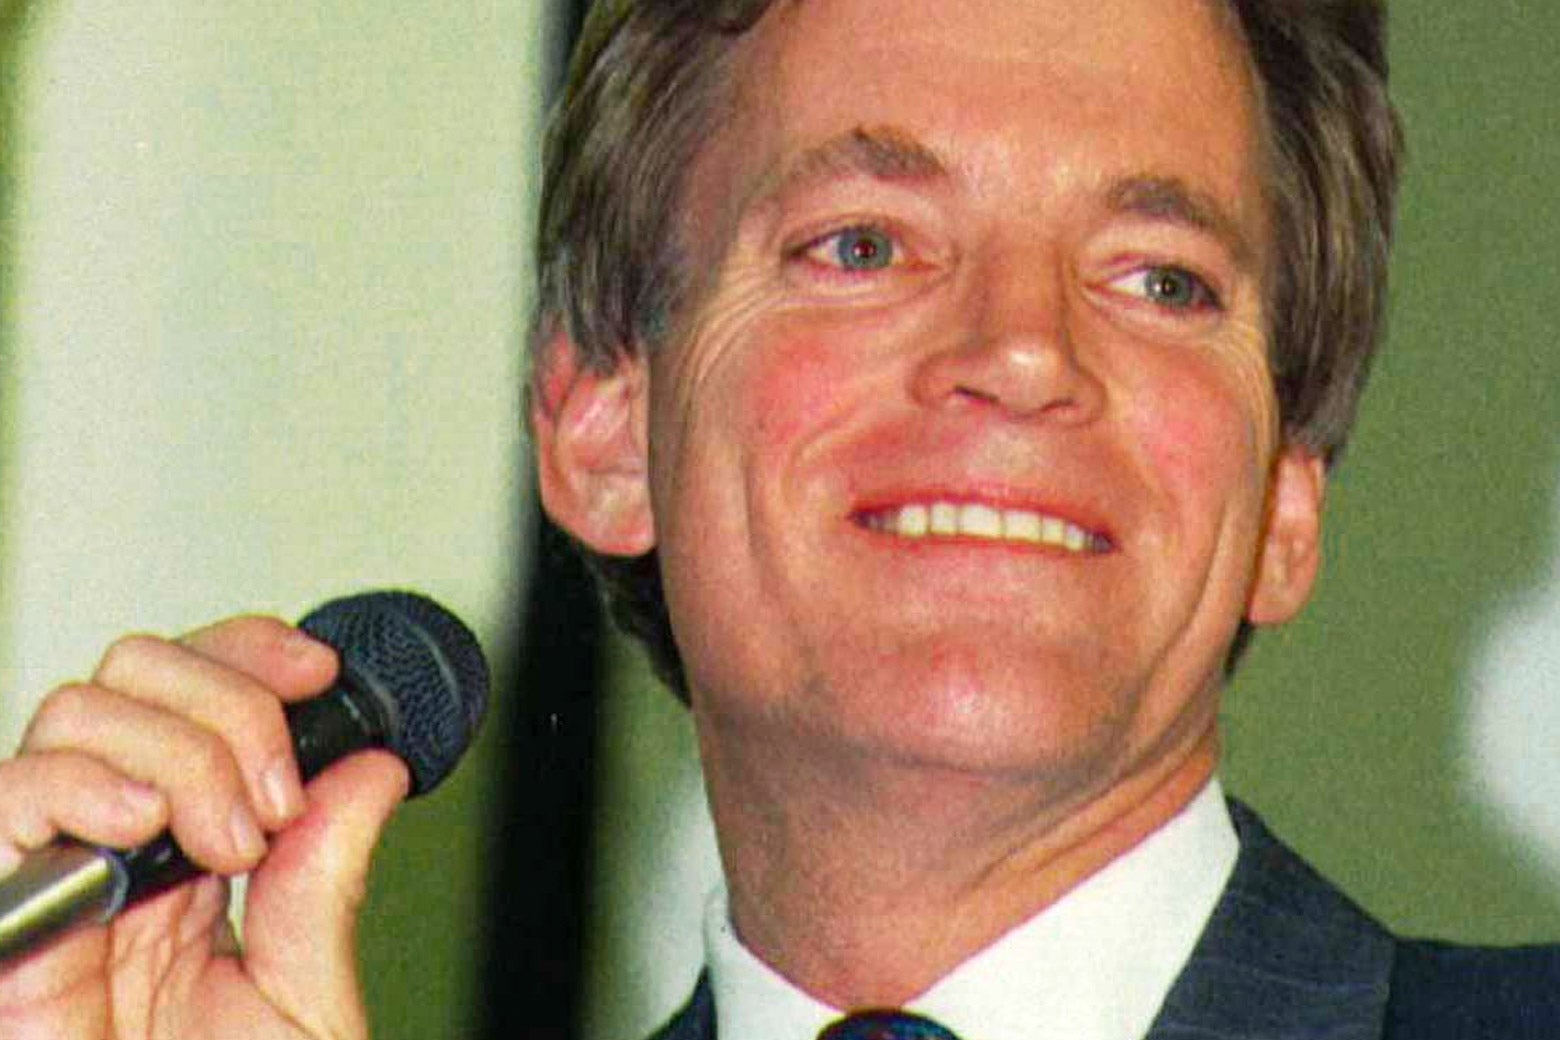 Close-up of David Duke smiling and holding a microphone.